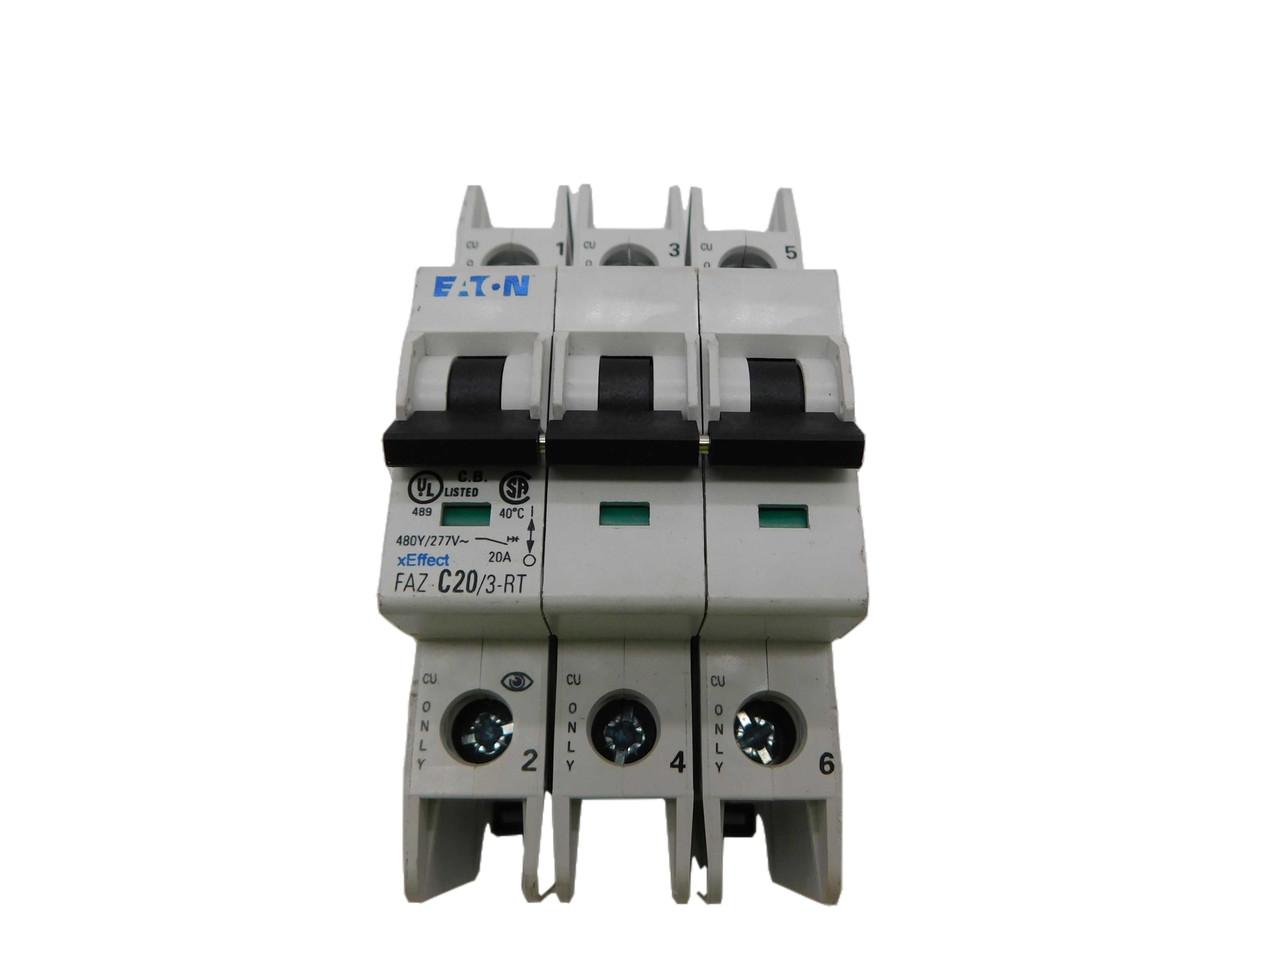 Eaton FAZ-C20/3-RT 277/480 VAC 50/60 Hz, 20 A, 3-Pole, 10/14 kA, 5 to 10 x Rated Current, Ring Tongue Terminal, DIN Rail Mount, Standard Packaging, C-Curve, Current Limiting, Thermal Magnetic